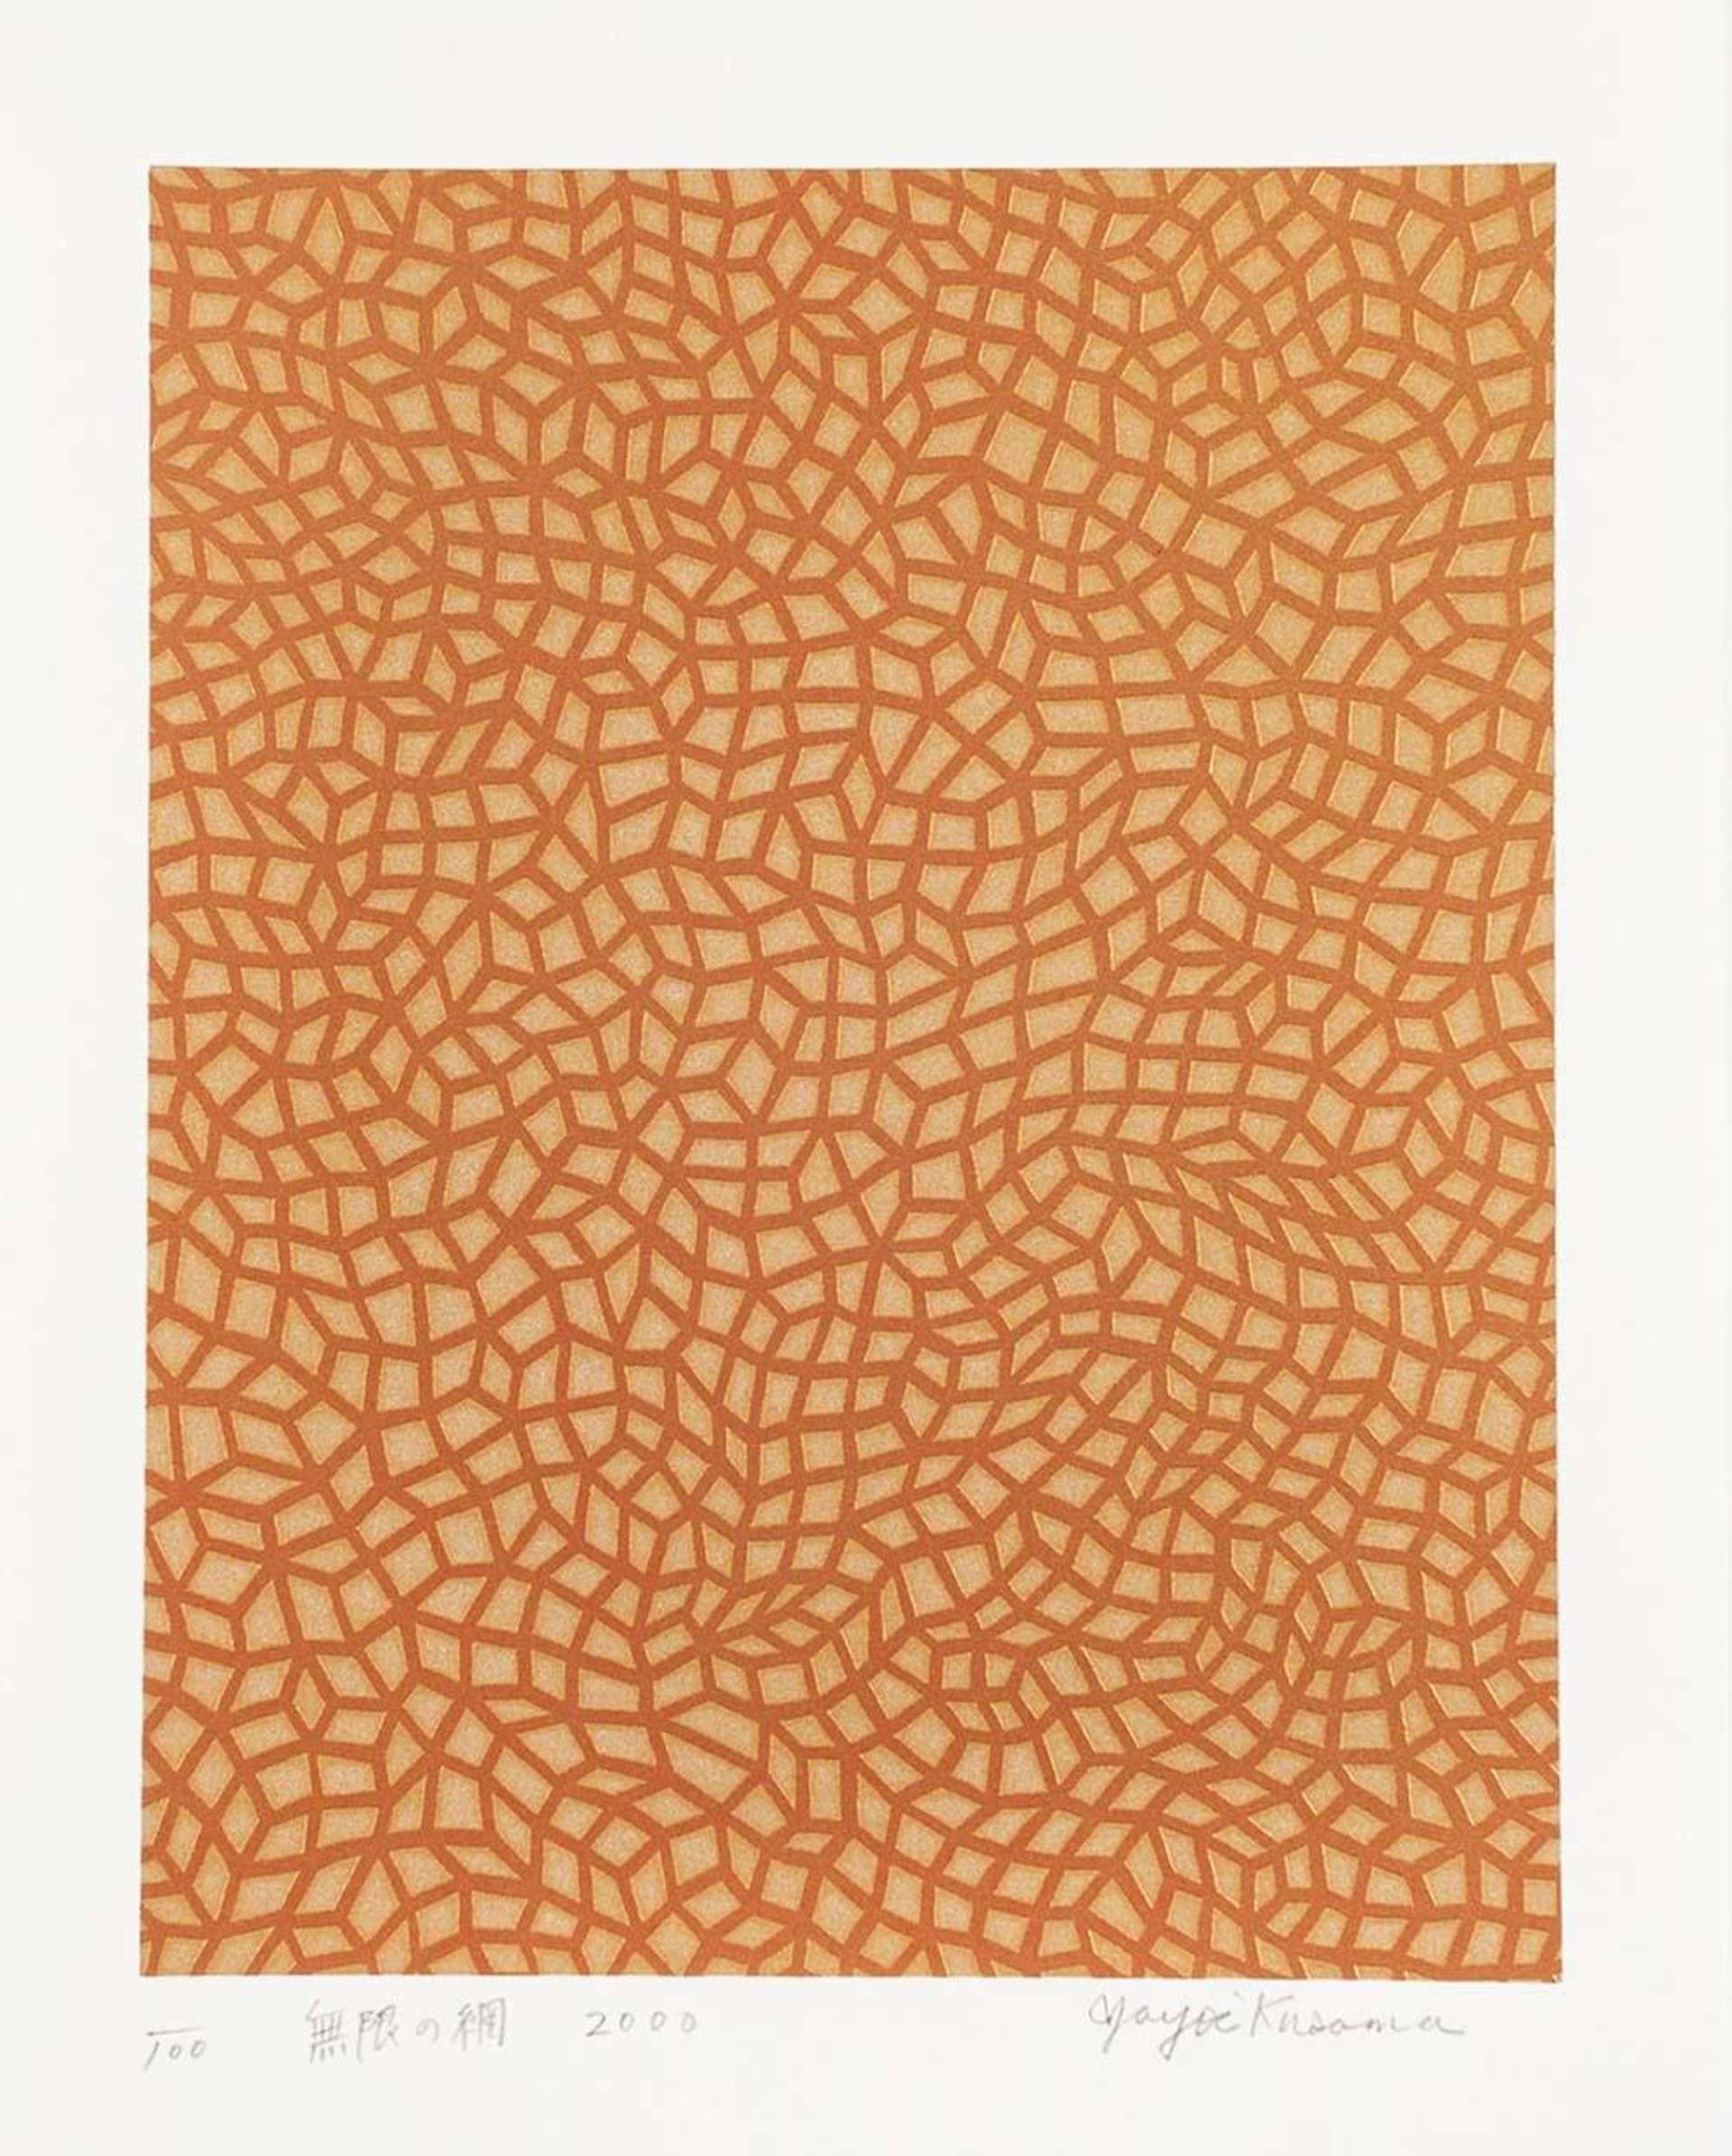 An image of the print Infinity Nets by Yayoi Kusama. It shows a mosaic, rendered in orange against a red background.